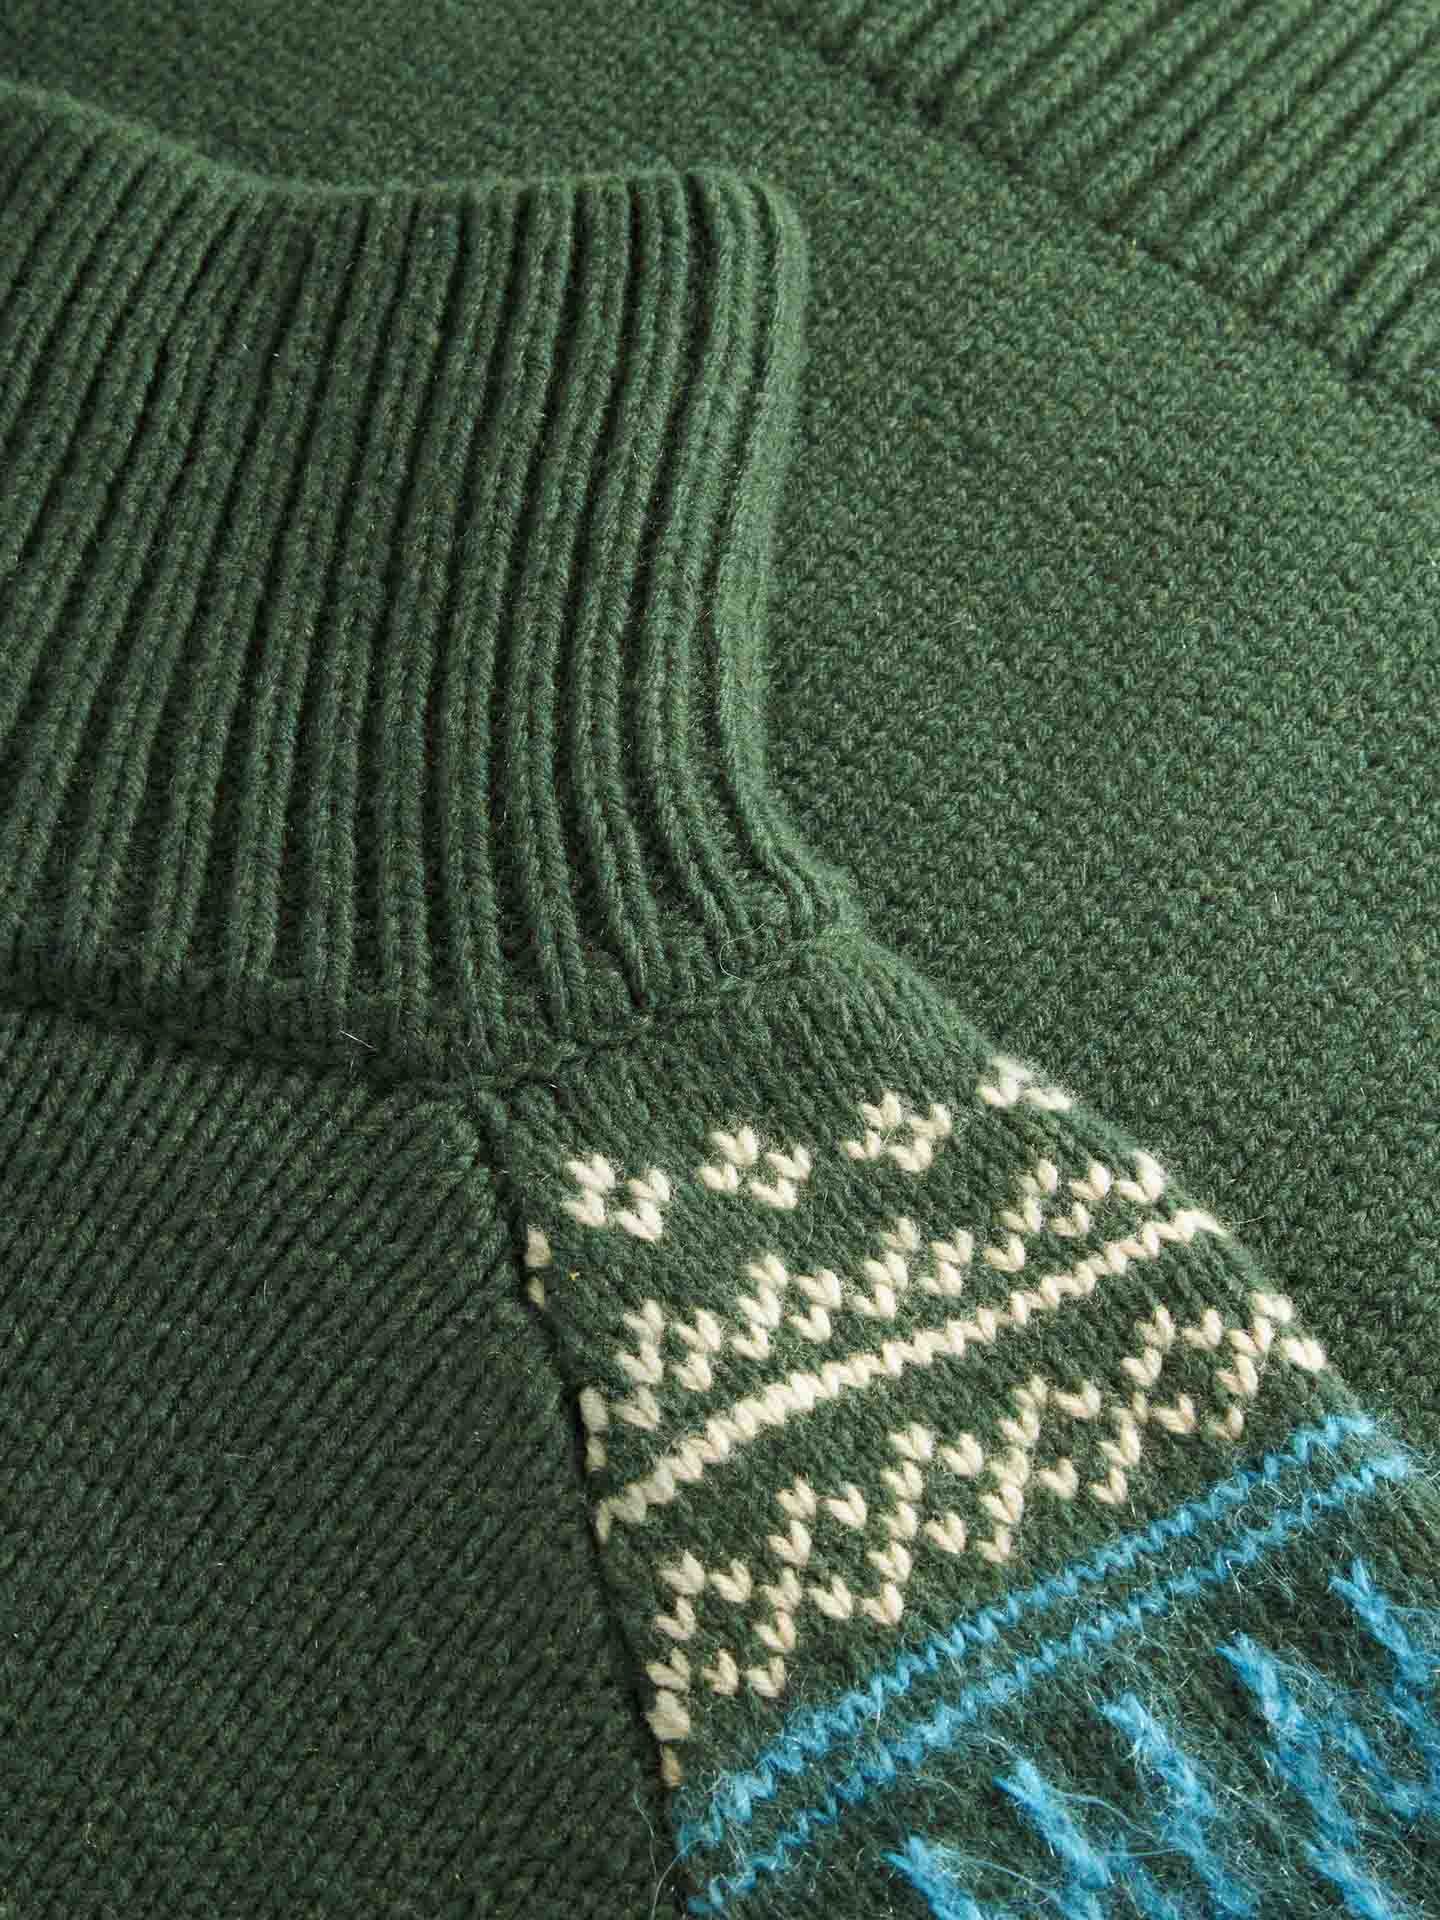 We Norwegians US, Hafjell, the ultimate ski sweater. Featuring a tight,  yet ultra stretchy knit in 100% fine merino with 3D knitting details and a  scuba li